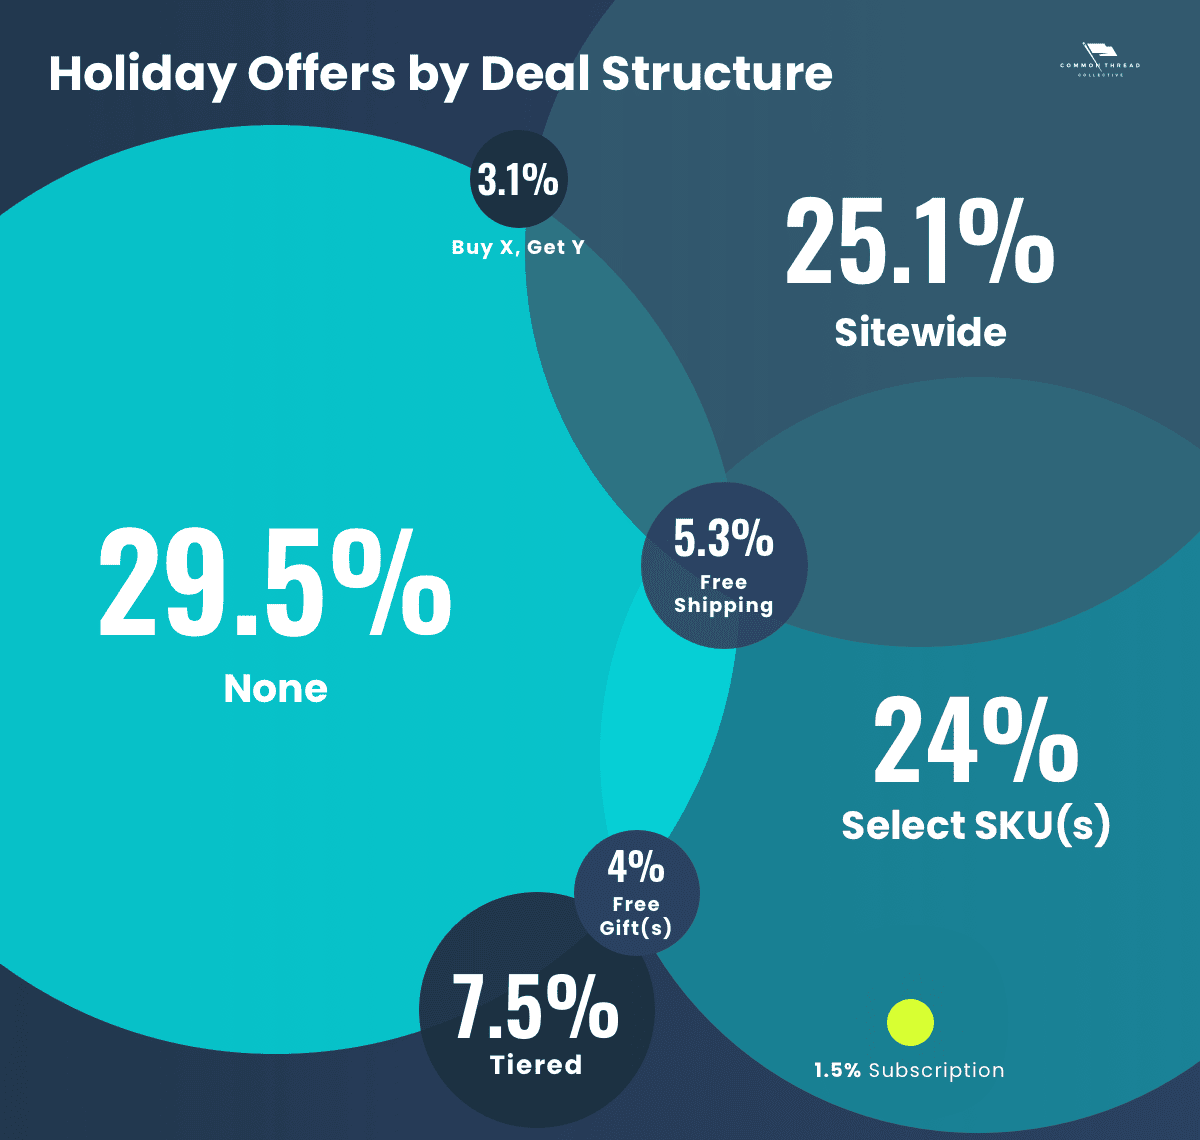 Ecommerce holiday offers by deal structure